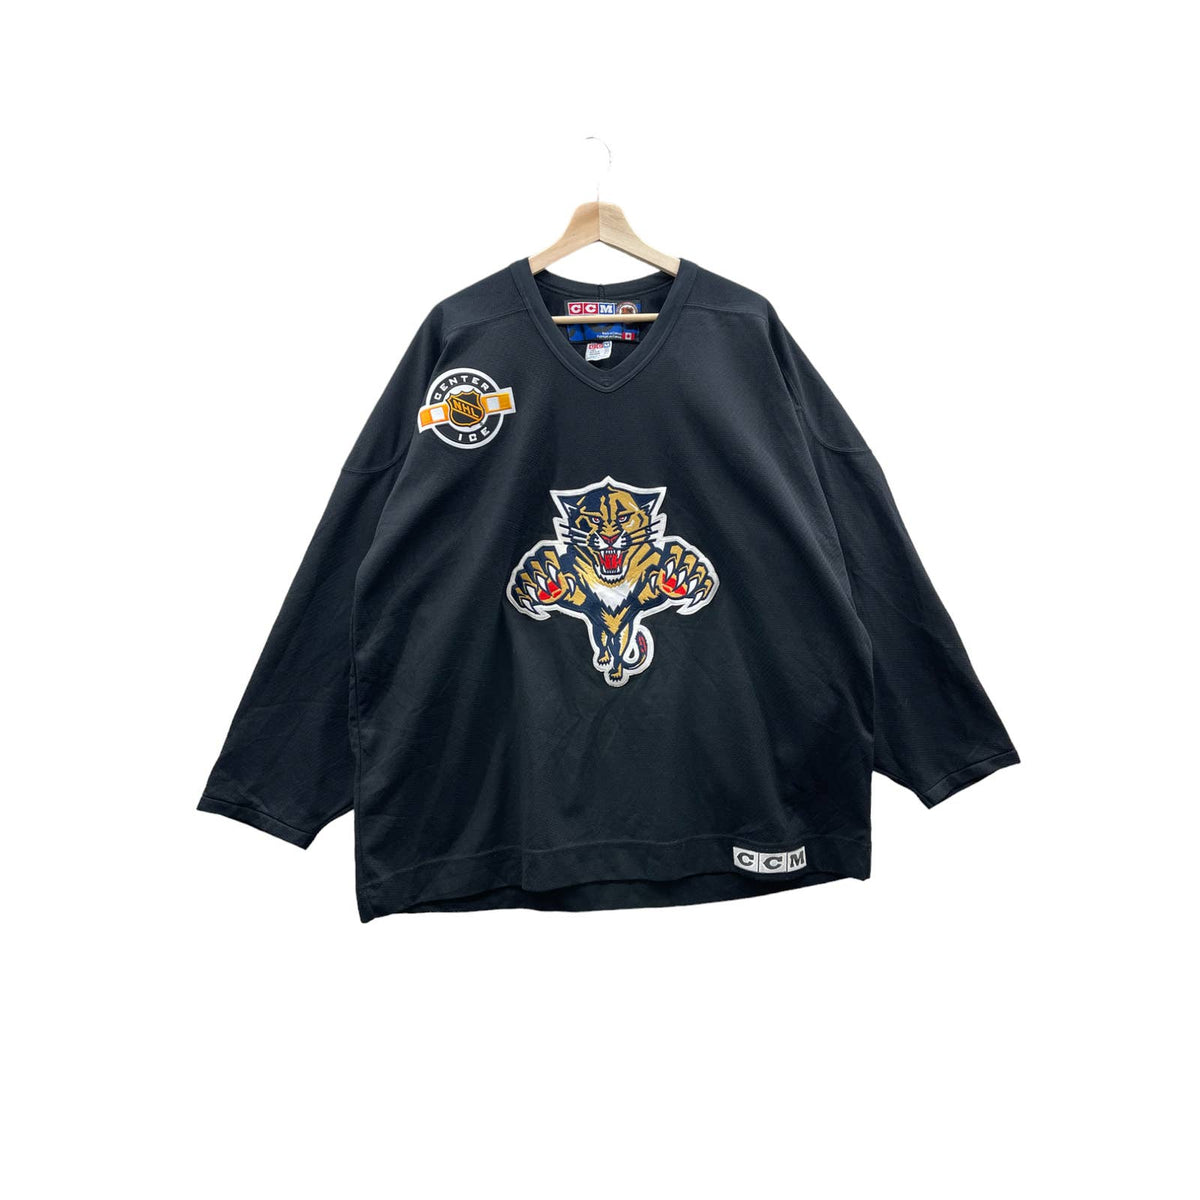 Vintage 2000's CCM Authentic Florida Panthers Hockey Jersey